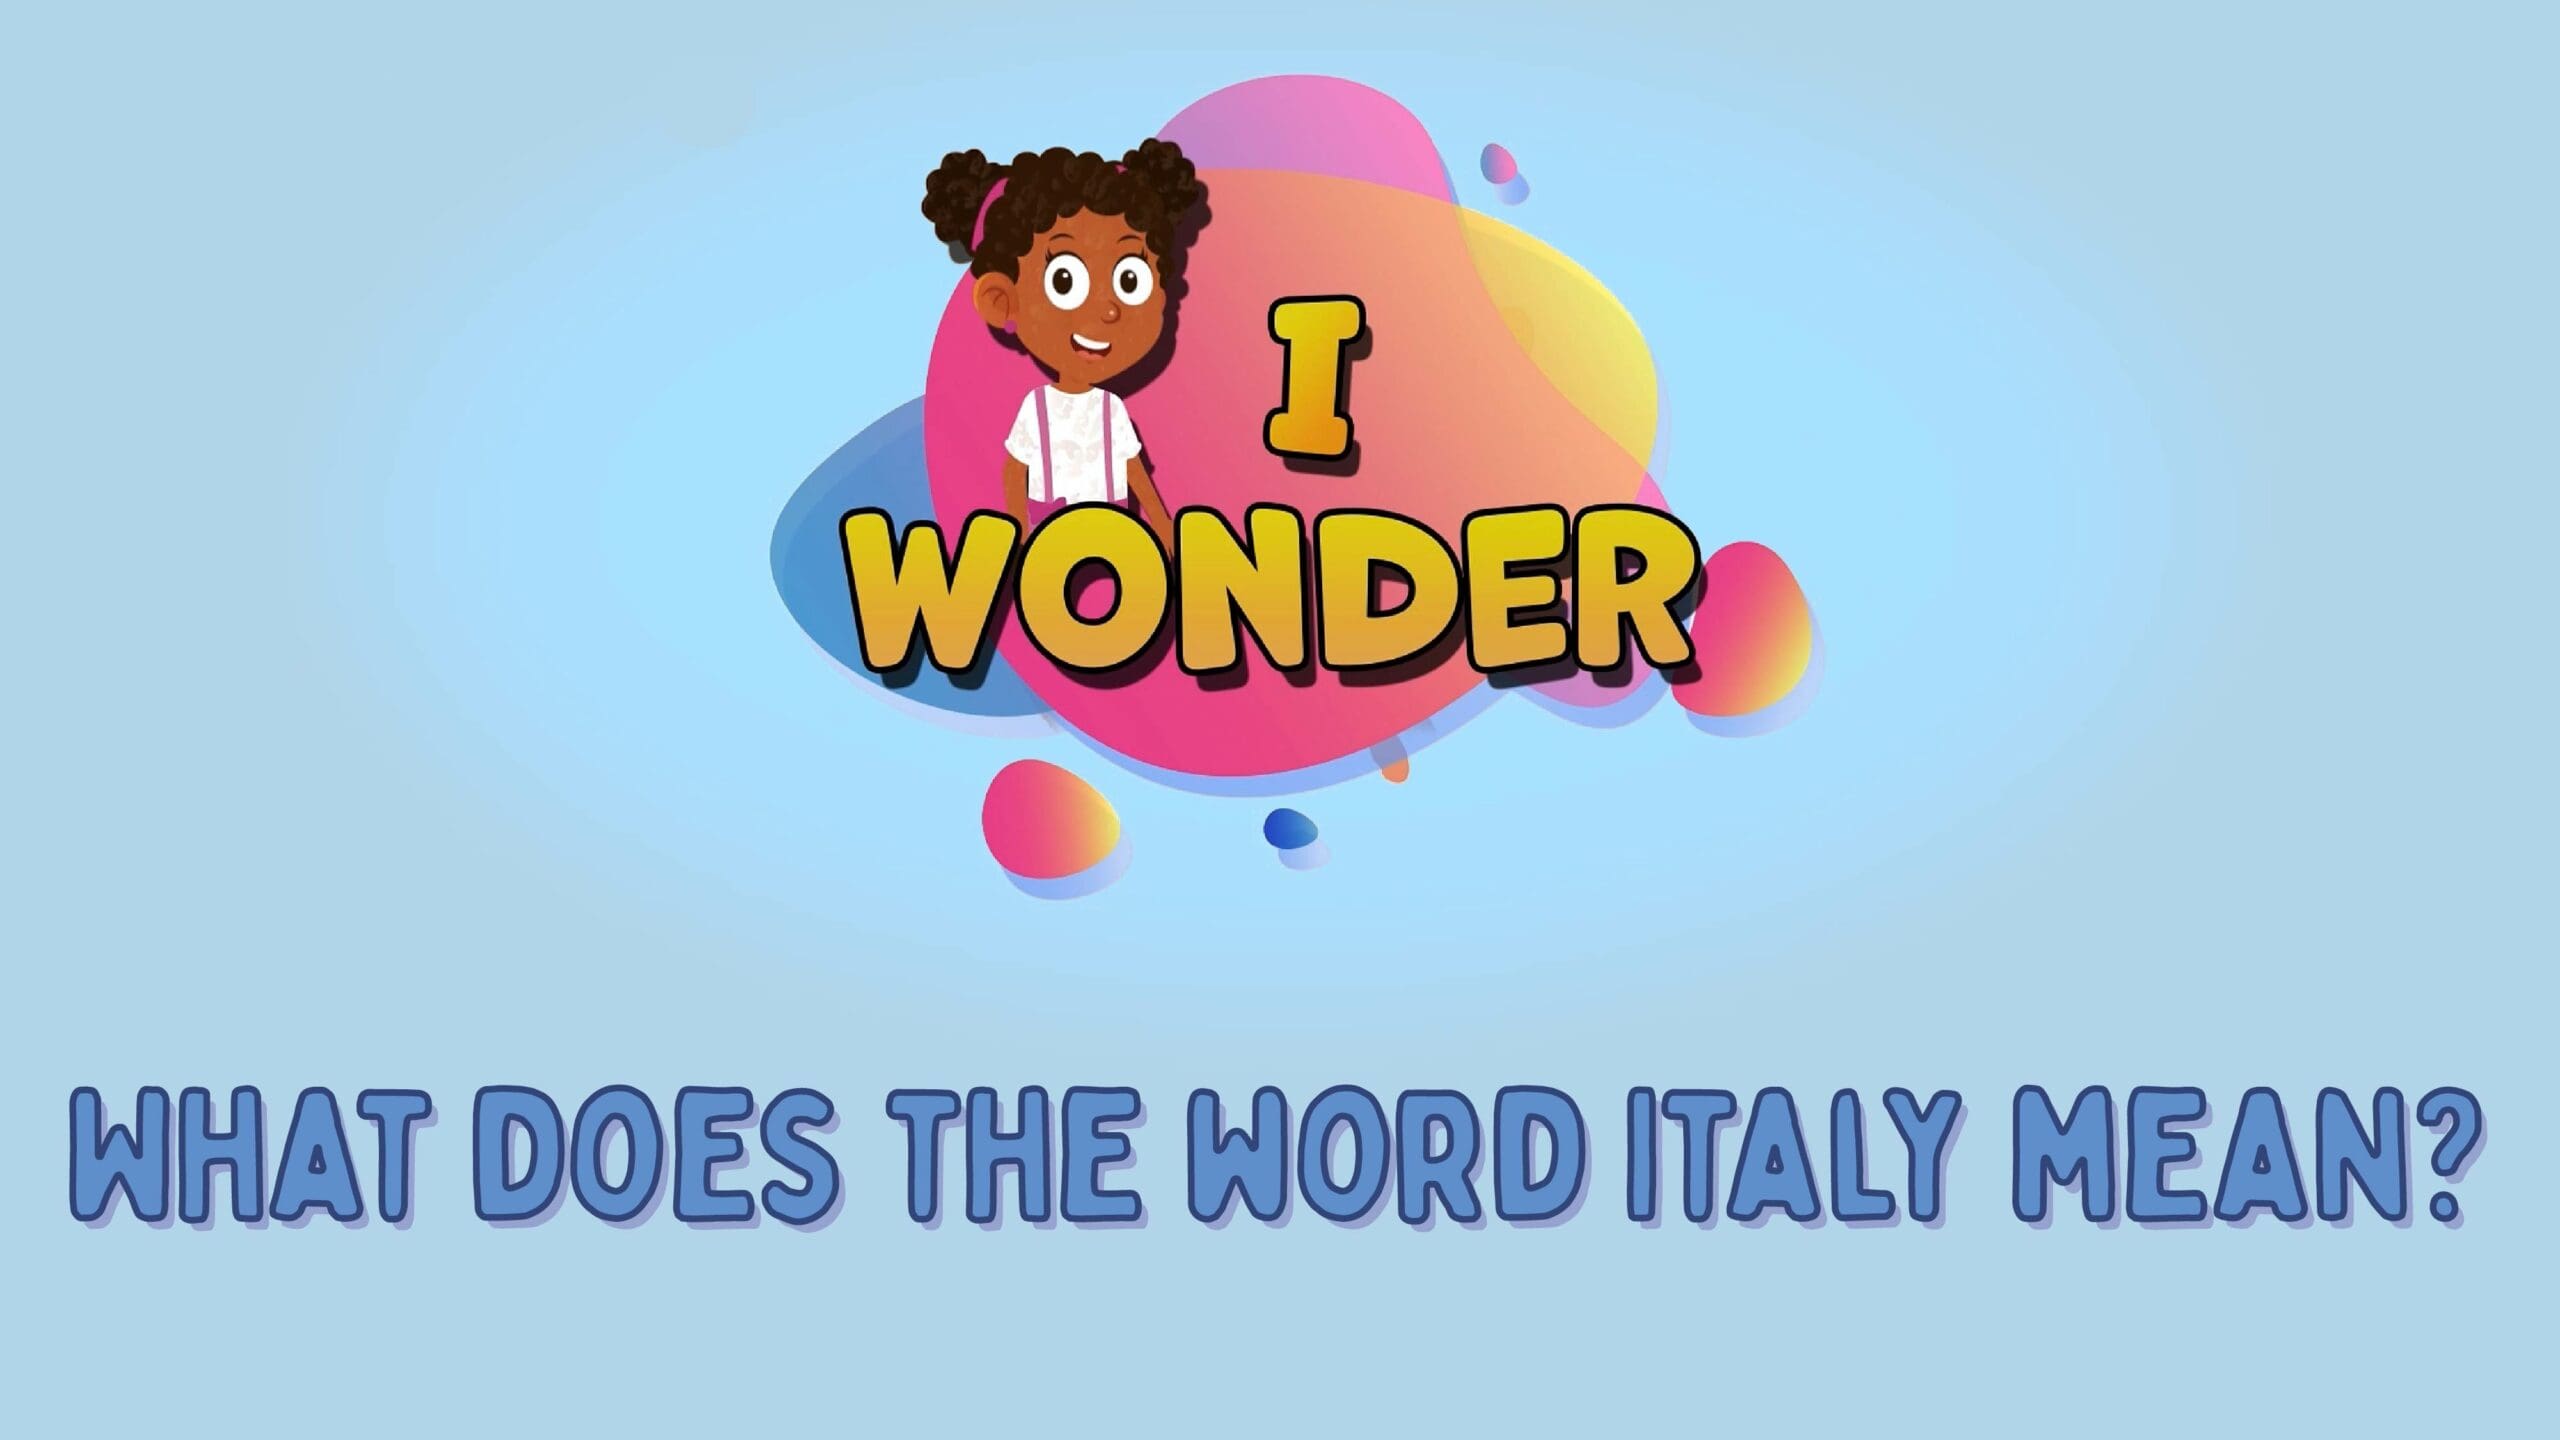 What Does The Word Italy Mean?